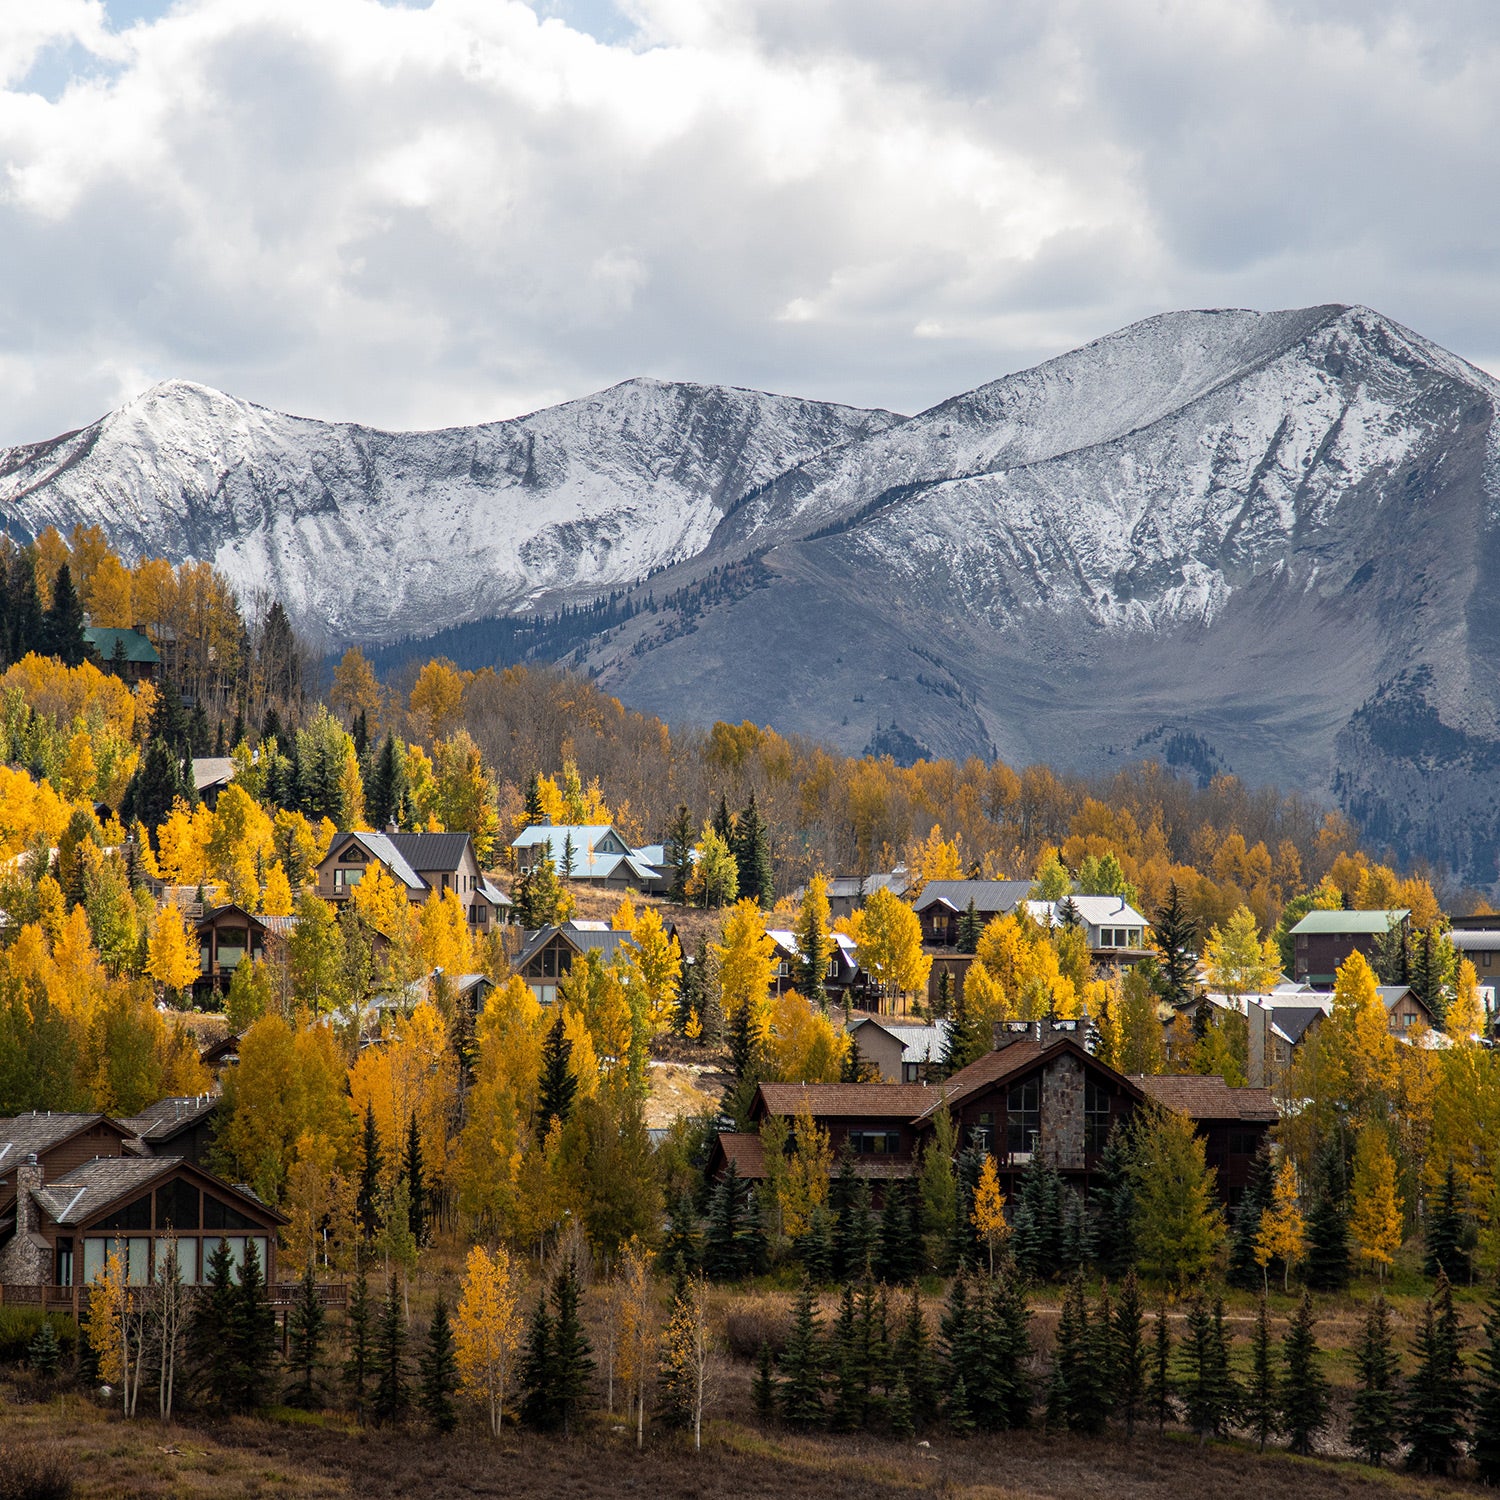 The 9 Best Mountain Towns to See Fall Foliage